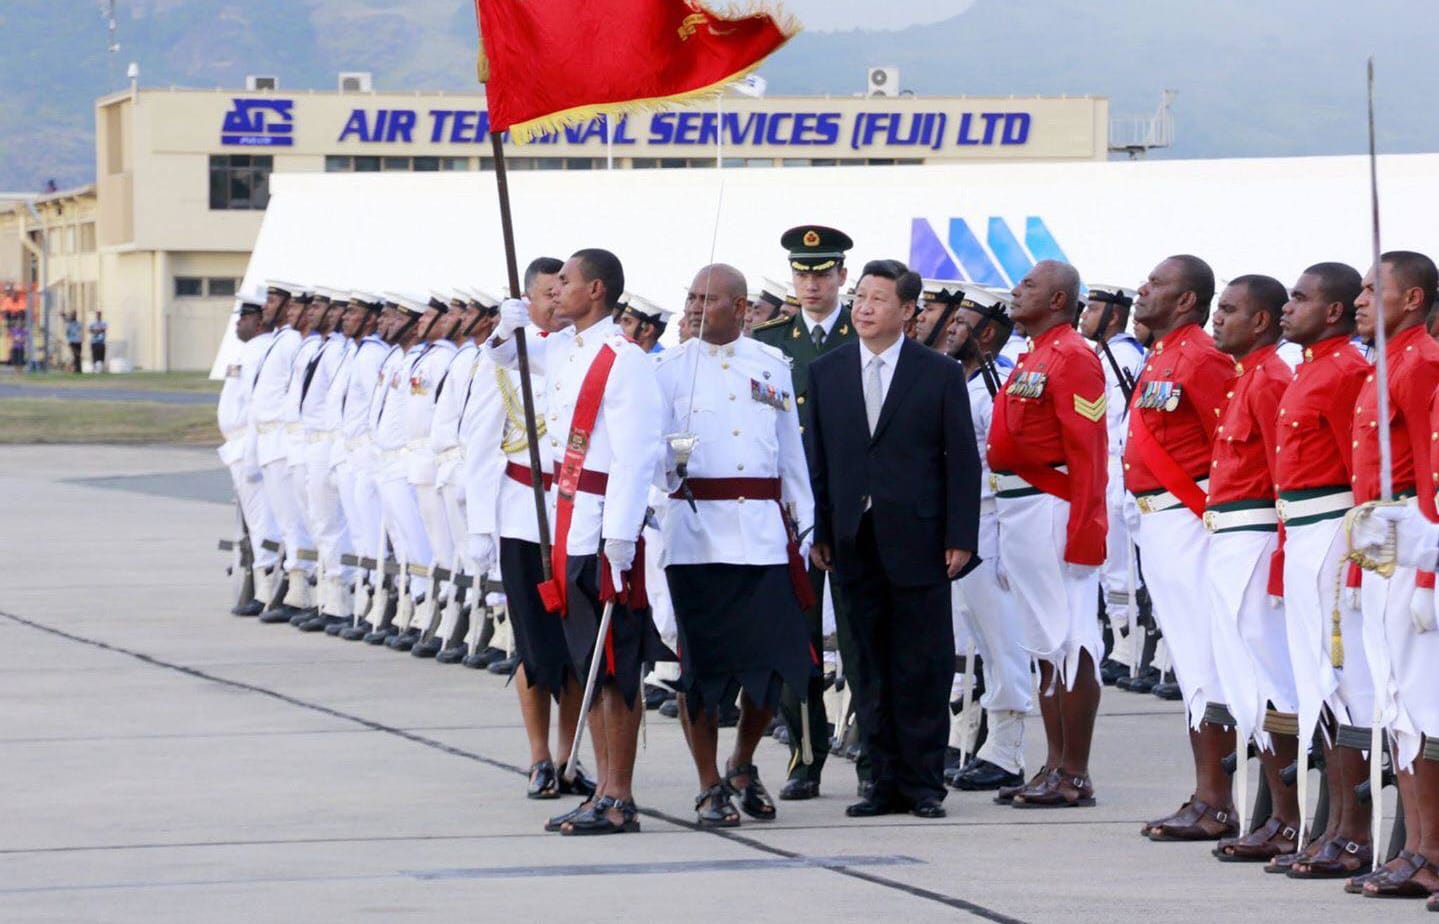 Chinese President Xi Jinping is welcomed to Fiji during his first visit to the Pacific island nation in November 2014.